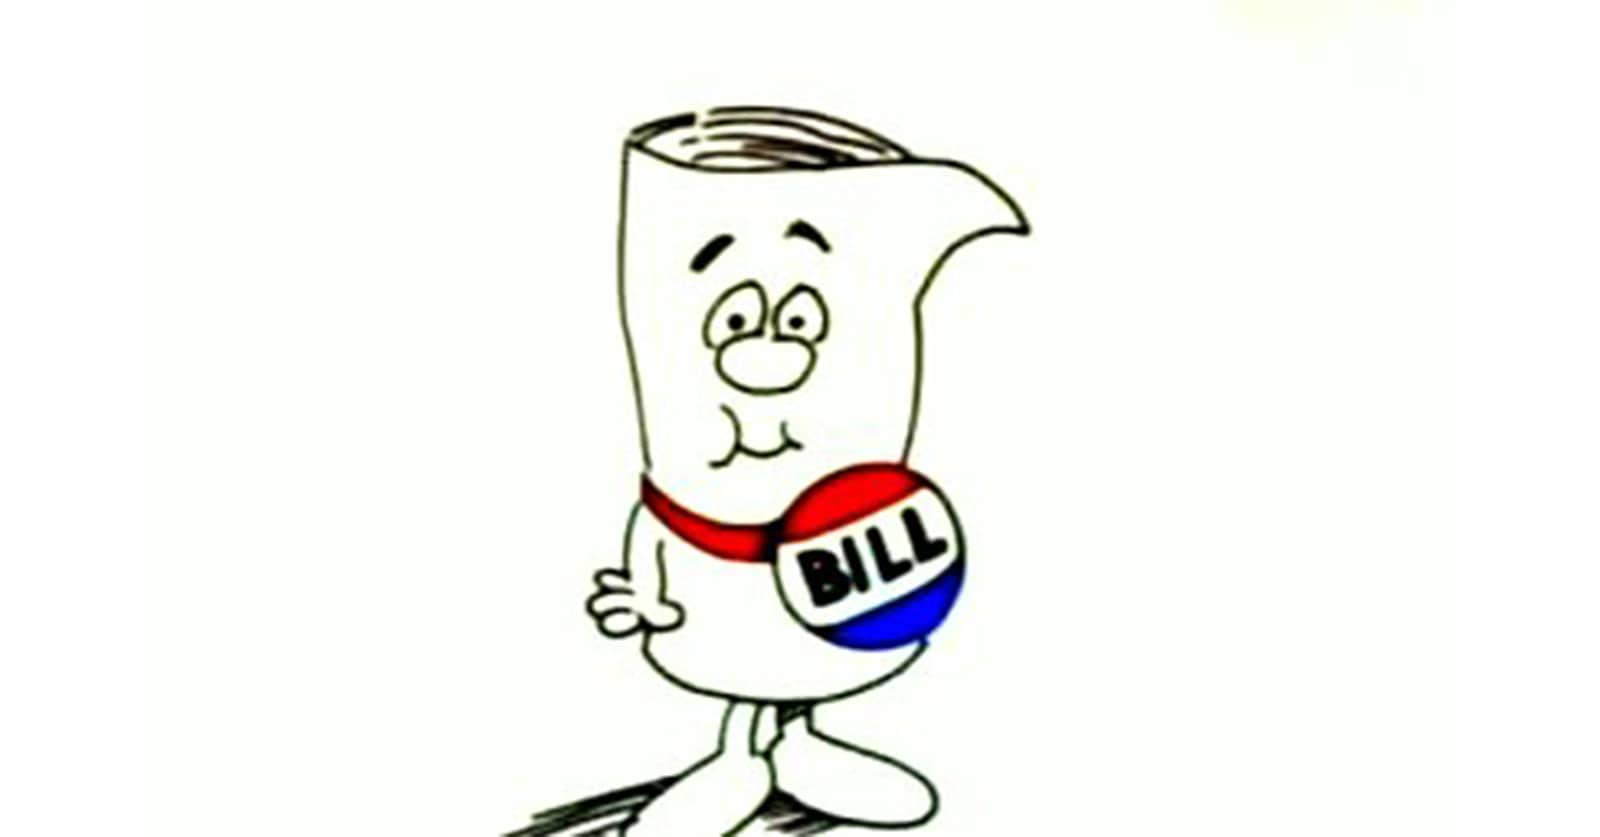 the bill from schoolhouse rock